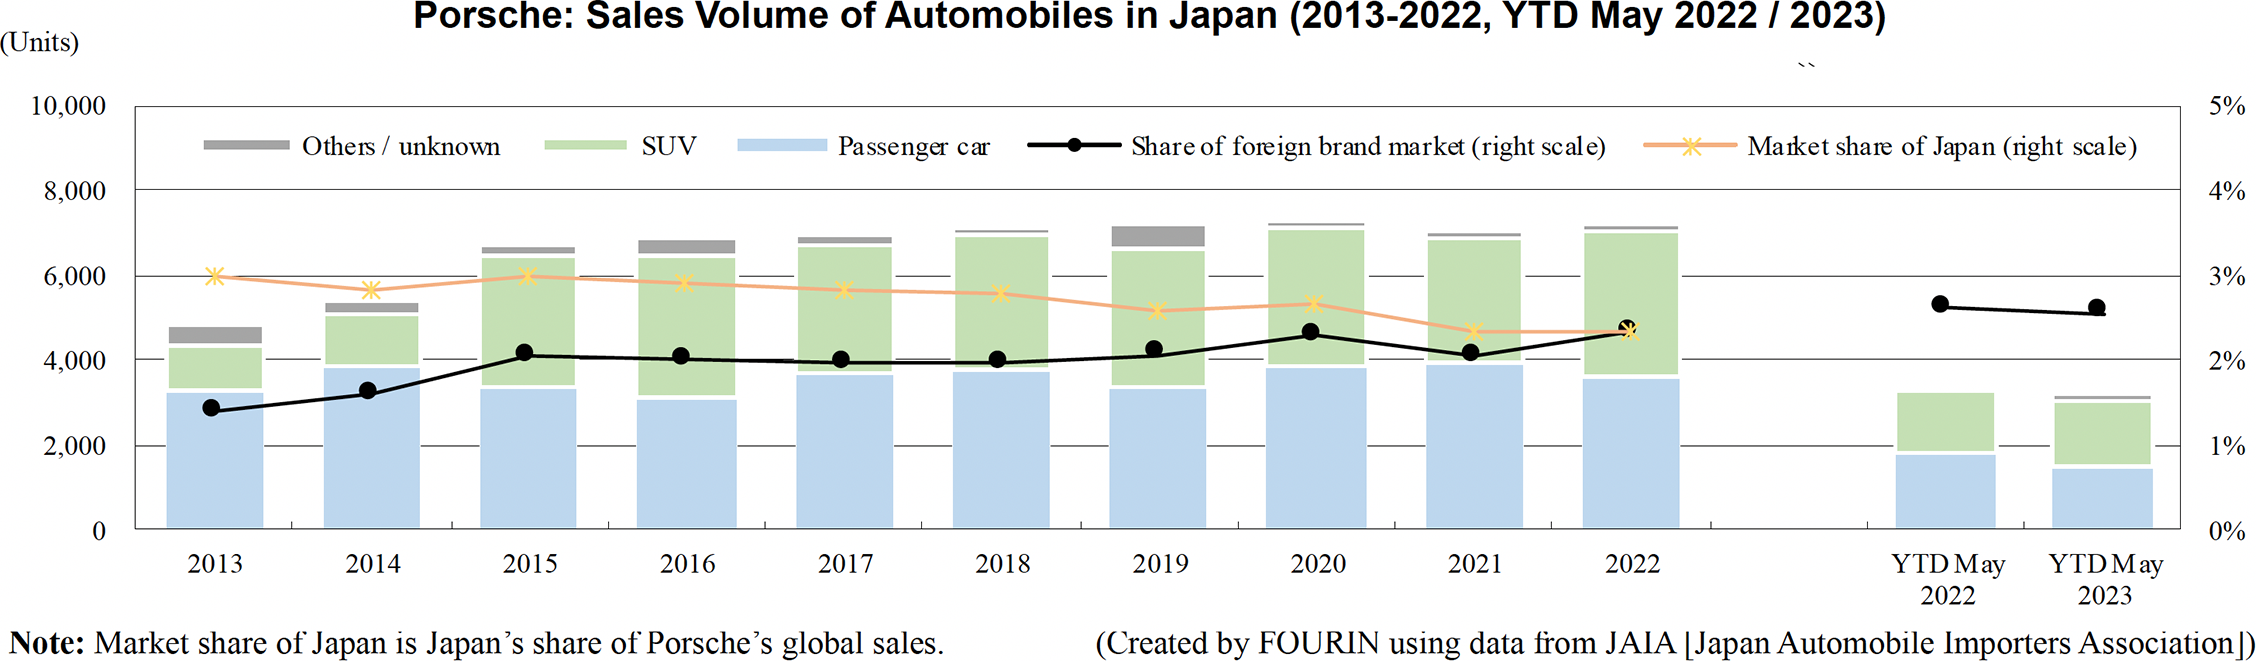 Graph: Porsche: Sales Volume of Automobiles in Japan (2013-2022, YTD May 2022 / 2023)